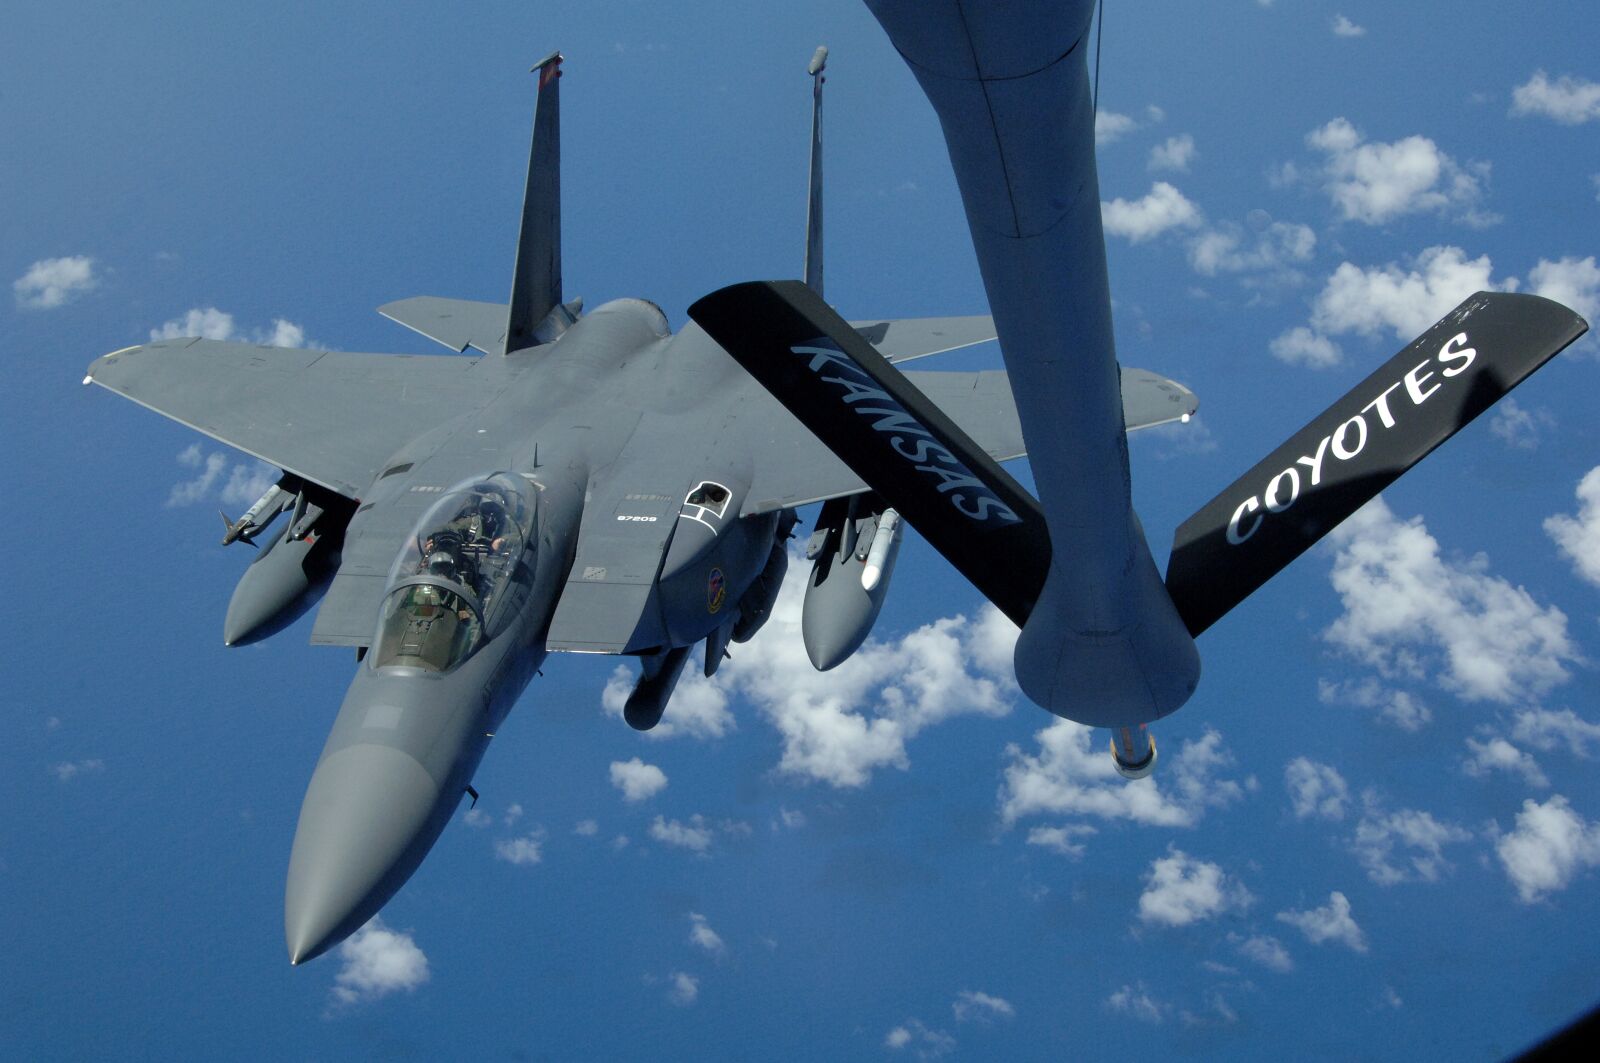 Nikon D2X sample photo. Fighters, f 15, eagle photography